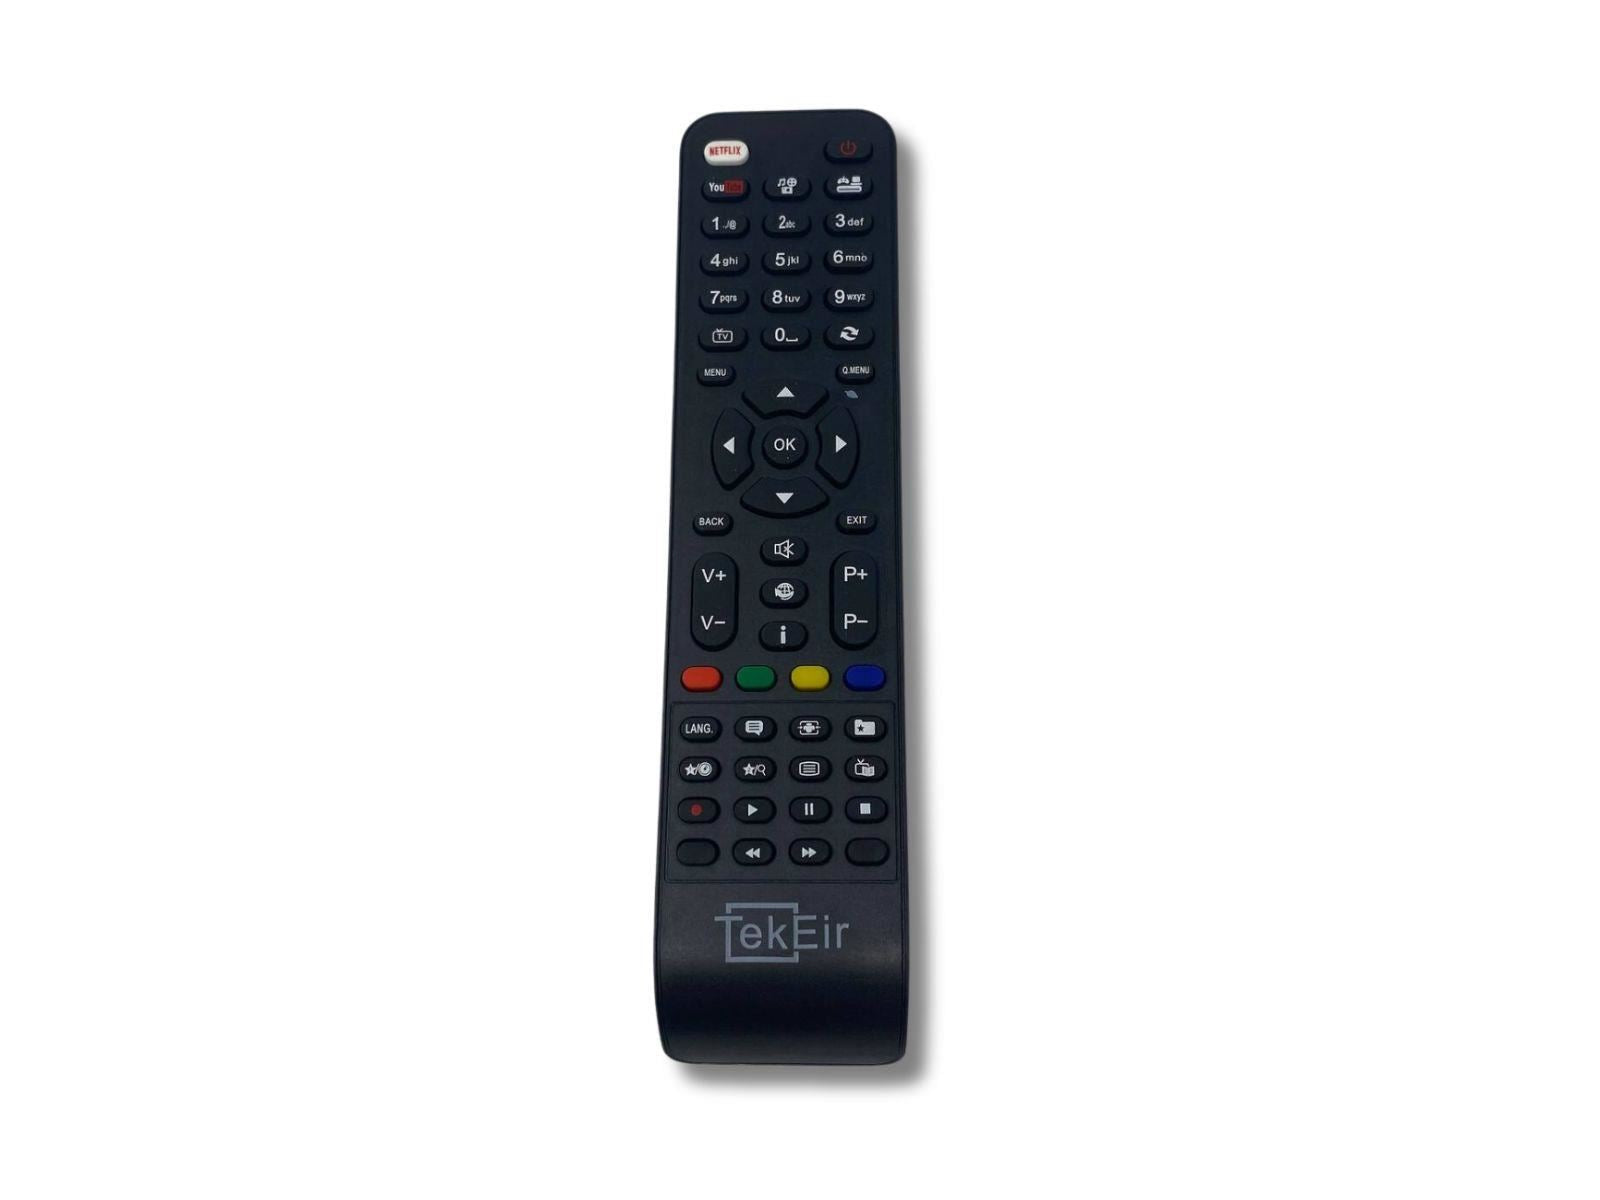 Image shows an overhead view of the replacement remote control